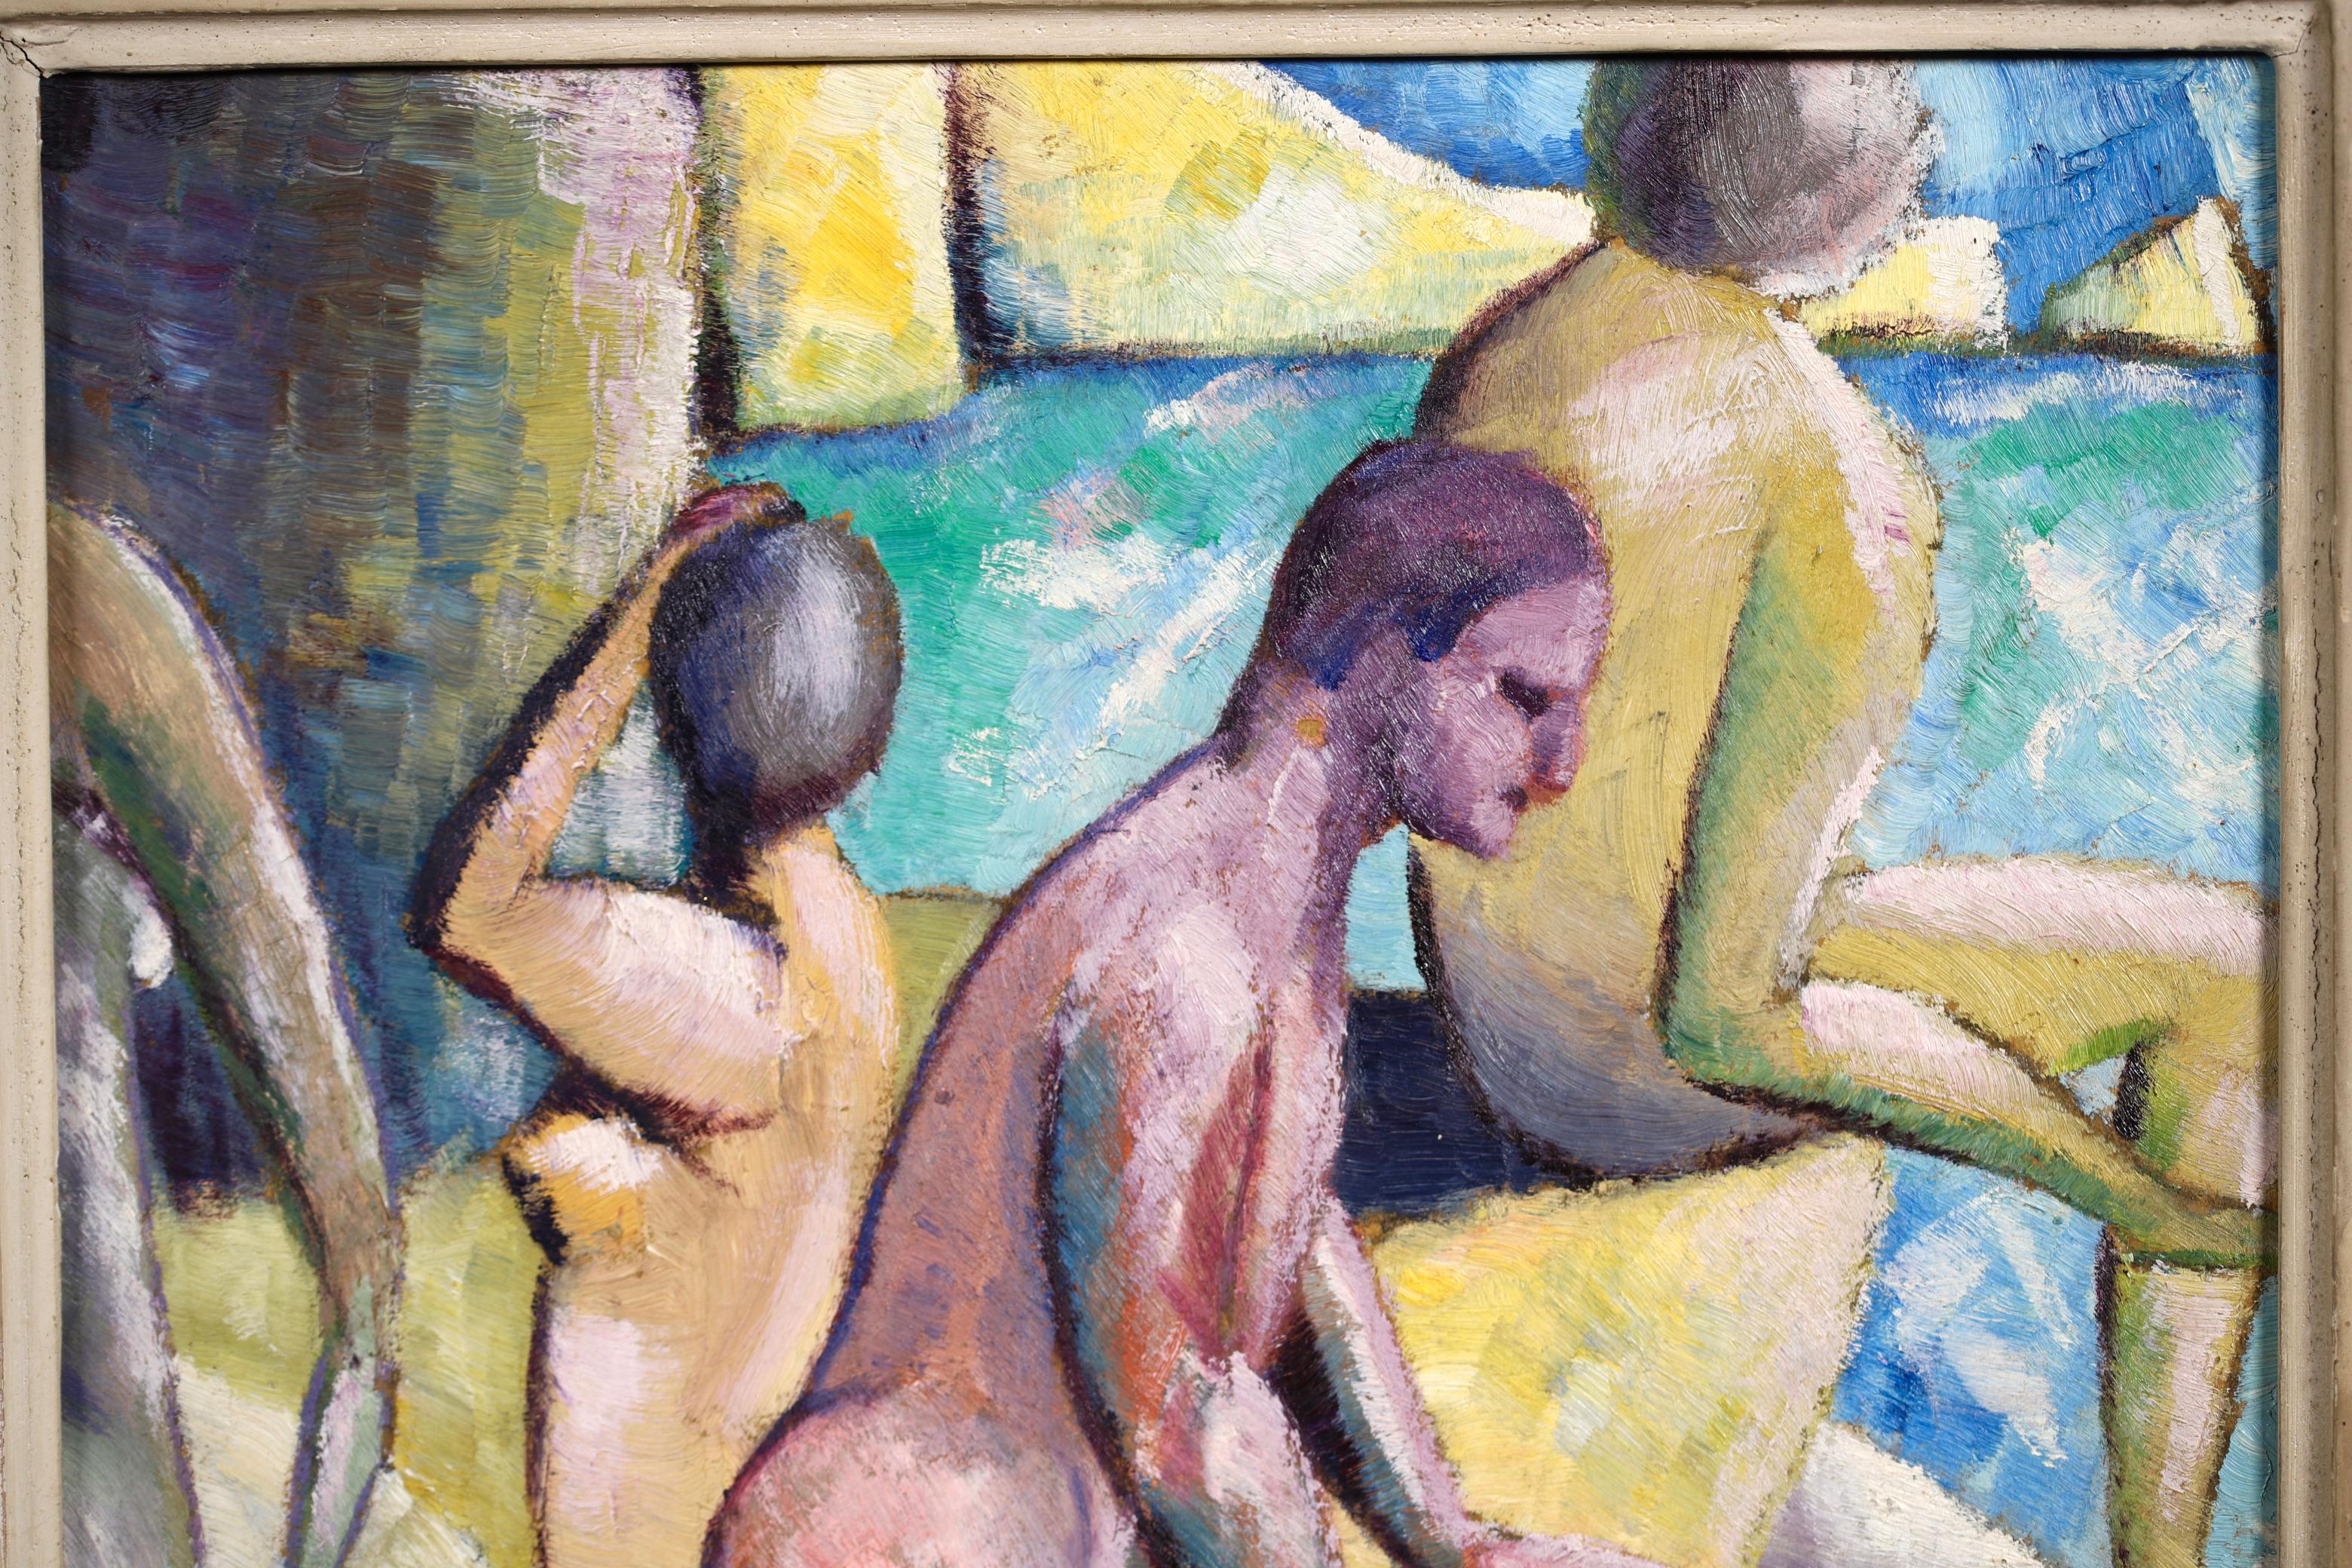 A wonderful cubist oil on board circa 1920 by Lois Hutton depicting John Duncan Fergusson – Bathing at Eden Roc. The piece is painted in wonderful blues and yellows with the figure at the forefront standing out in pinks and purples.

With thanks to